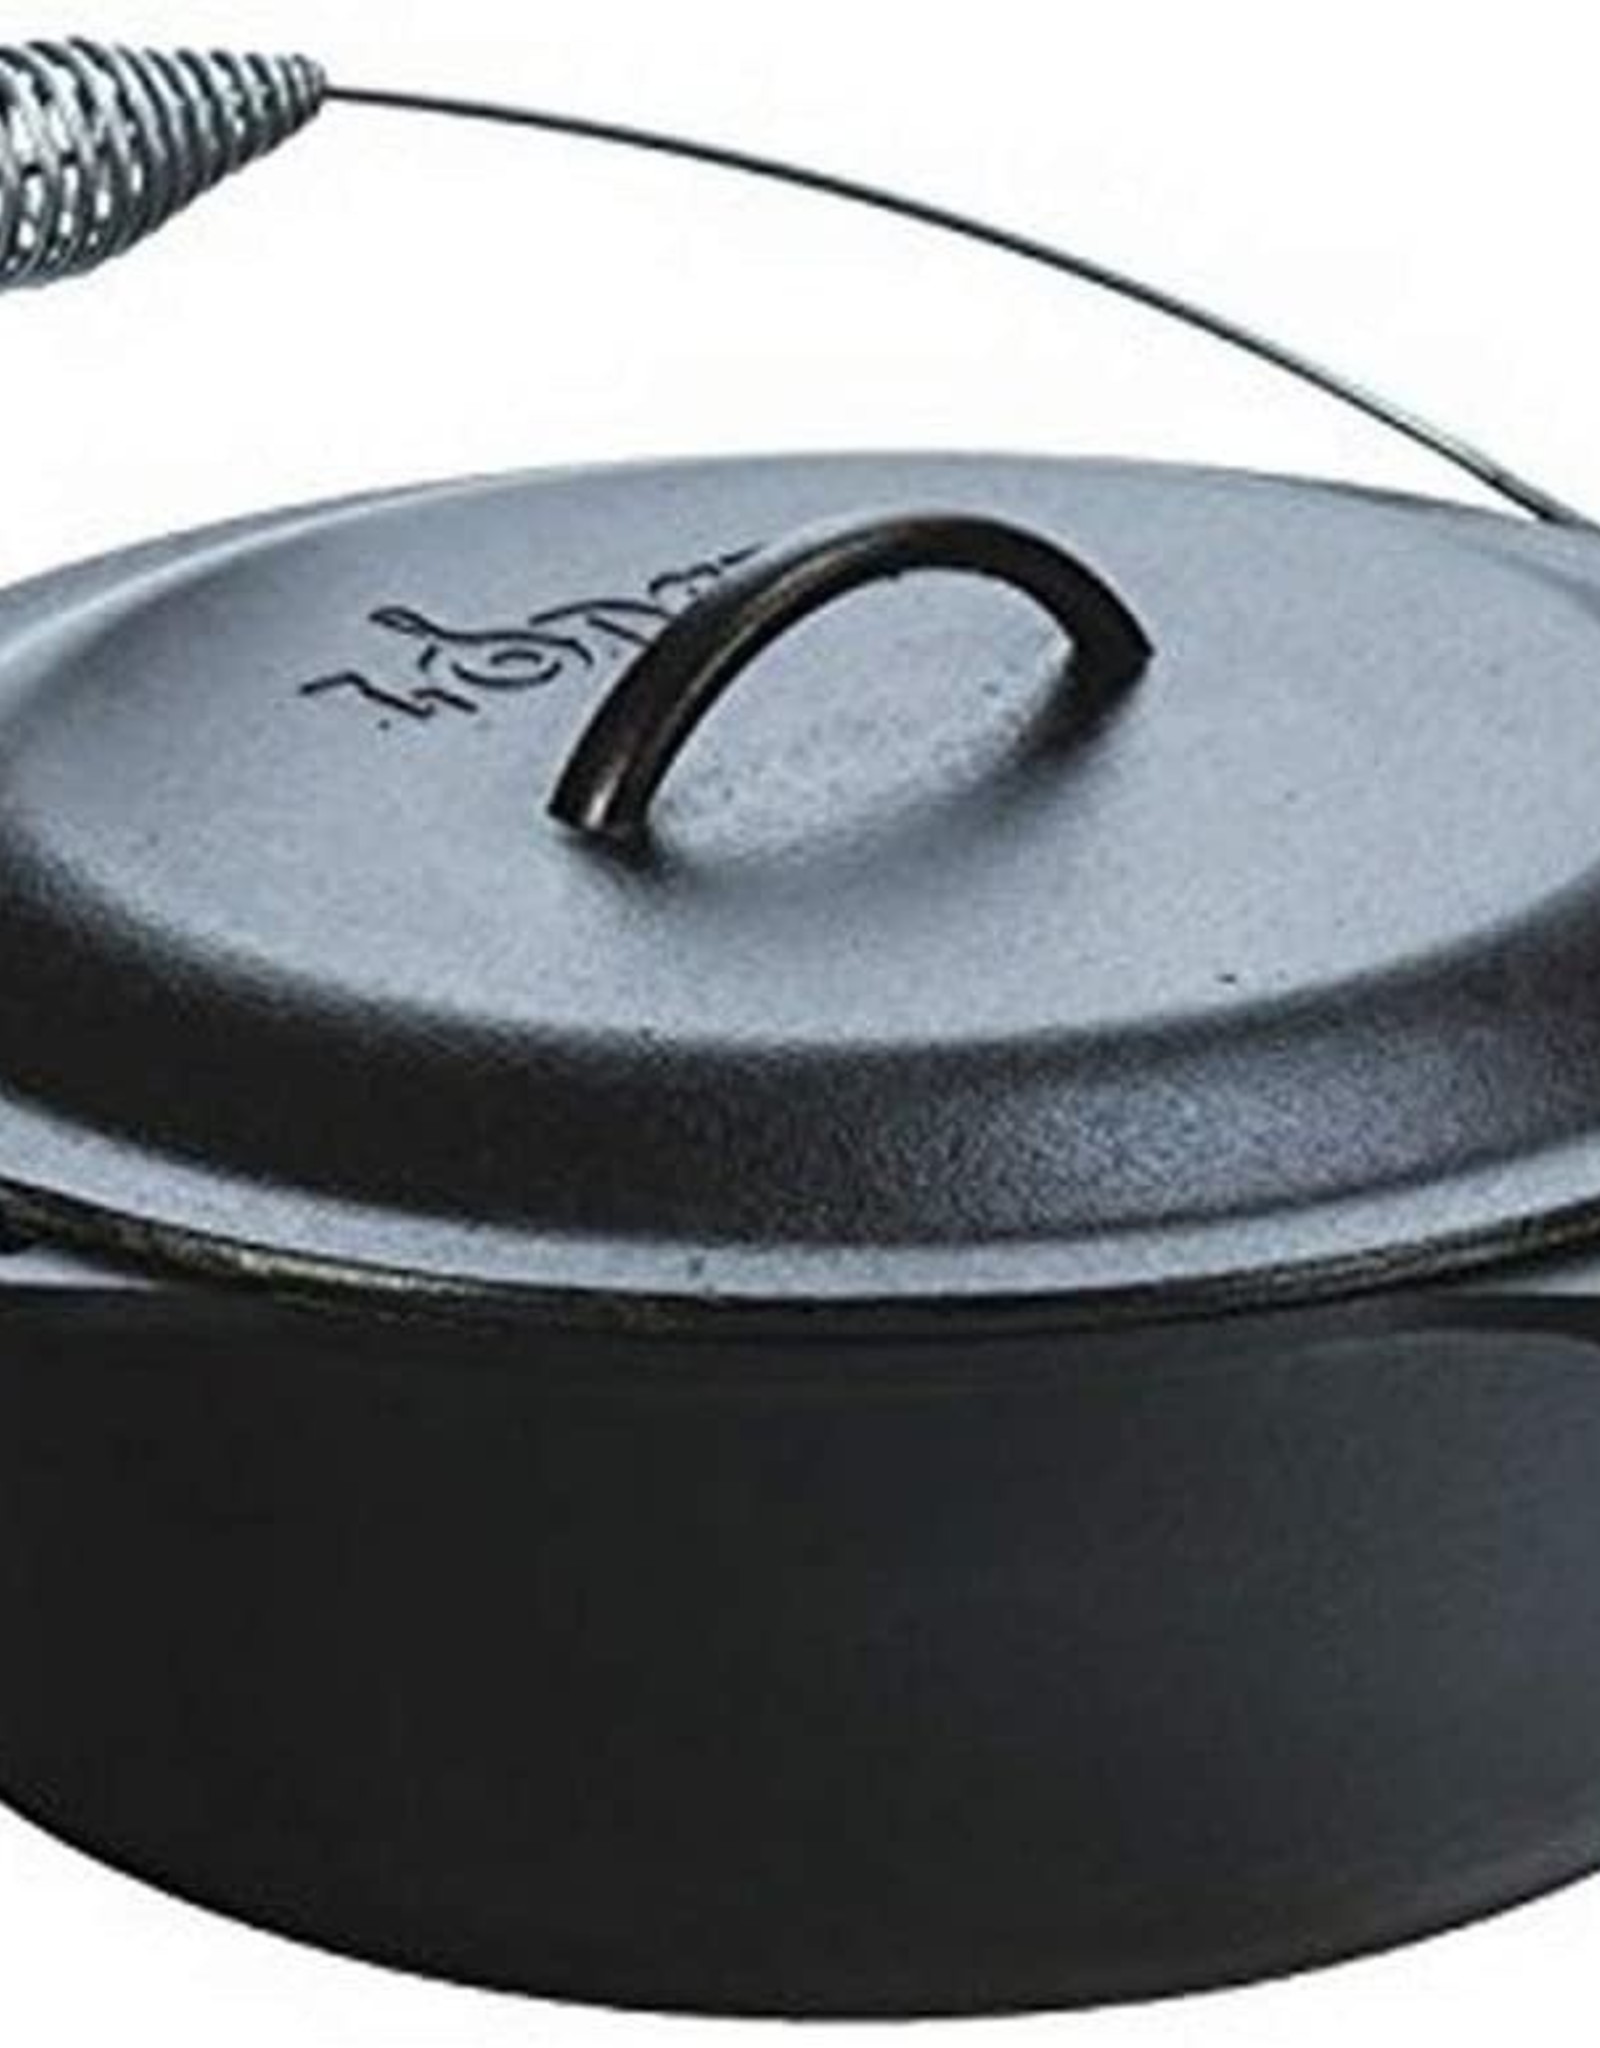 Lodge Lodge 9 Quart Cast Iron Dutch Oven. Pre Seasoned Cast Iron Pot and Lid with Wire Bail for Camp Cookin - L12D03